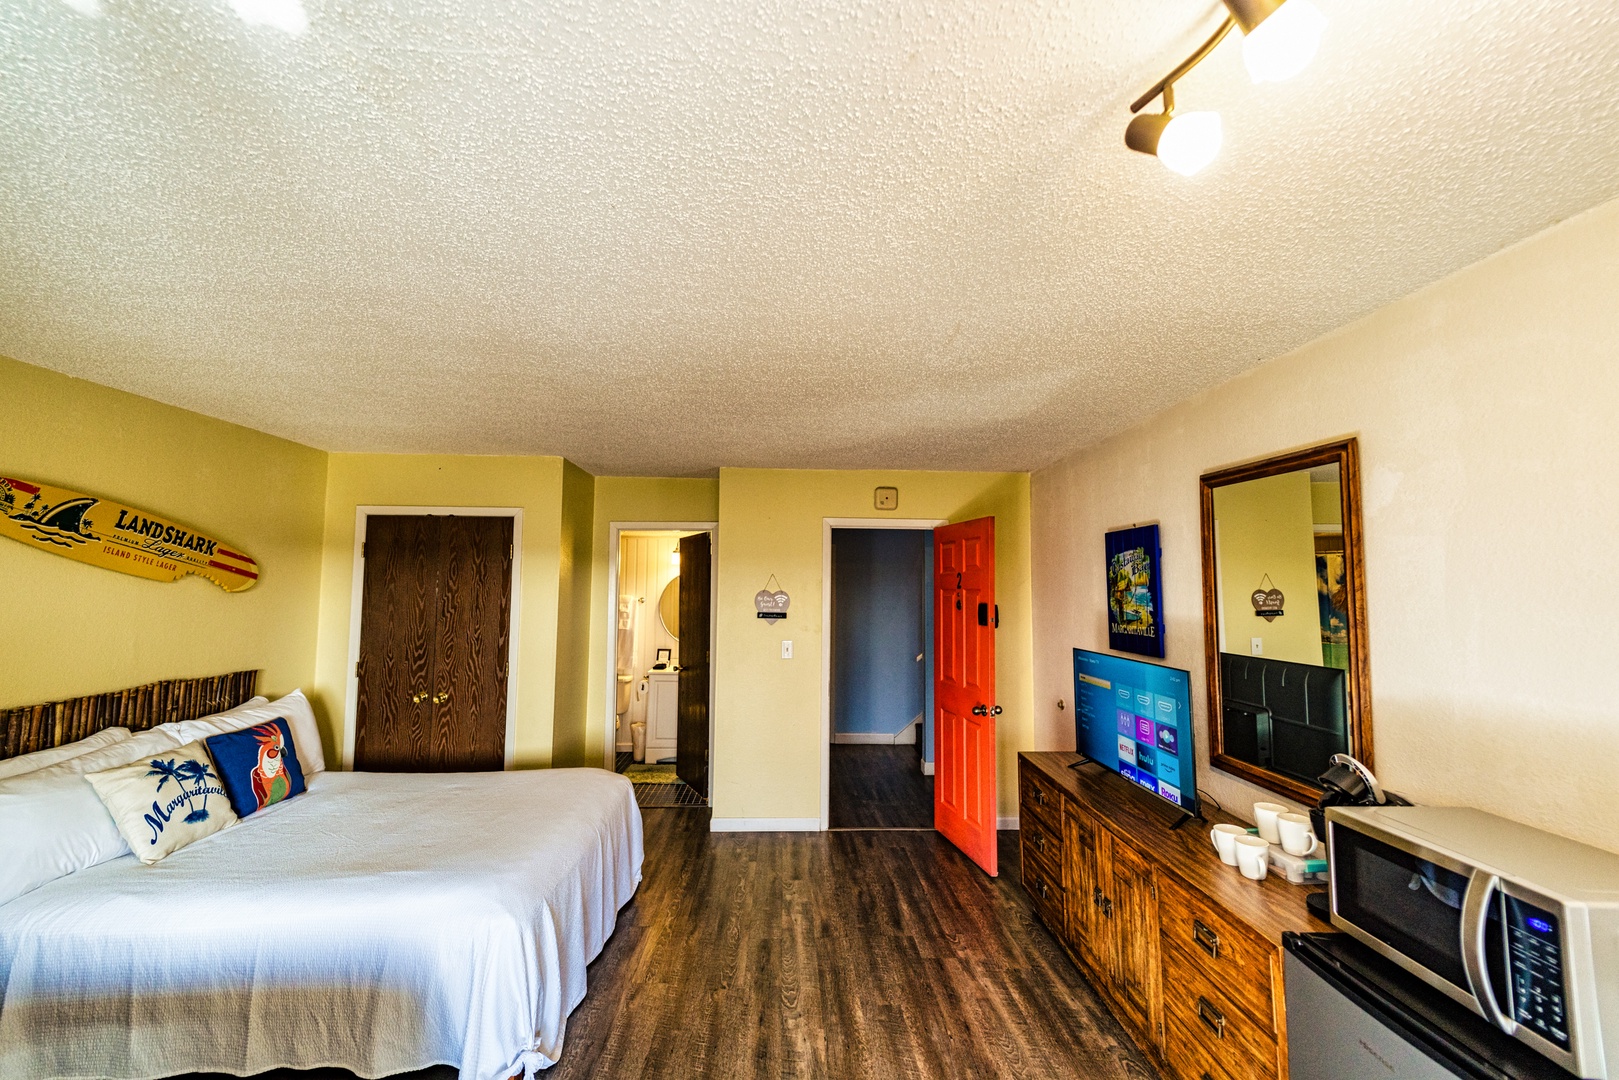 Hang Out 2 features two lavish queen beds, dining area, & a full bath